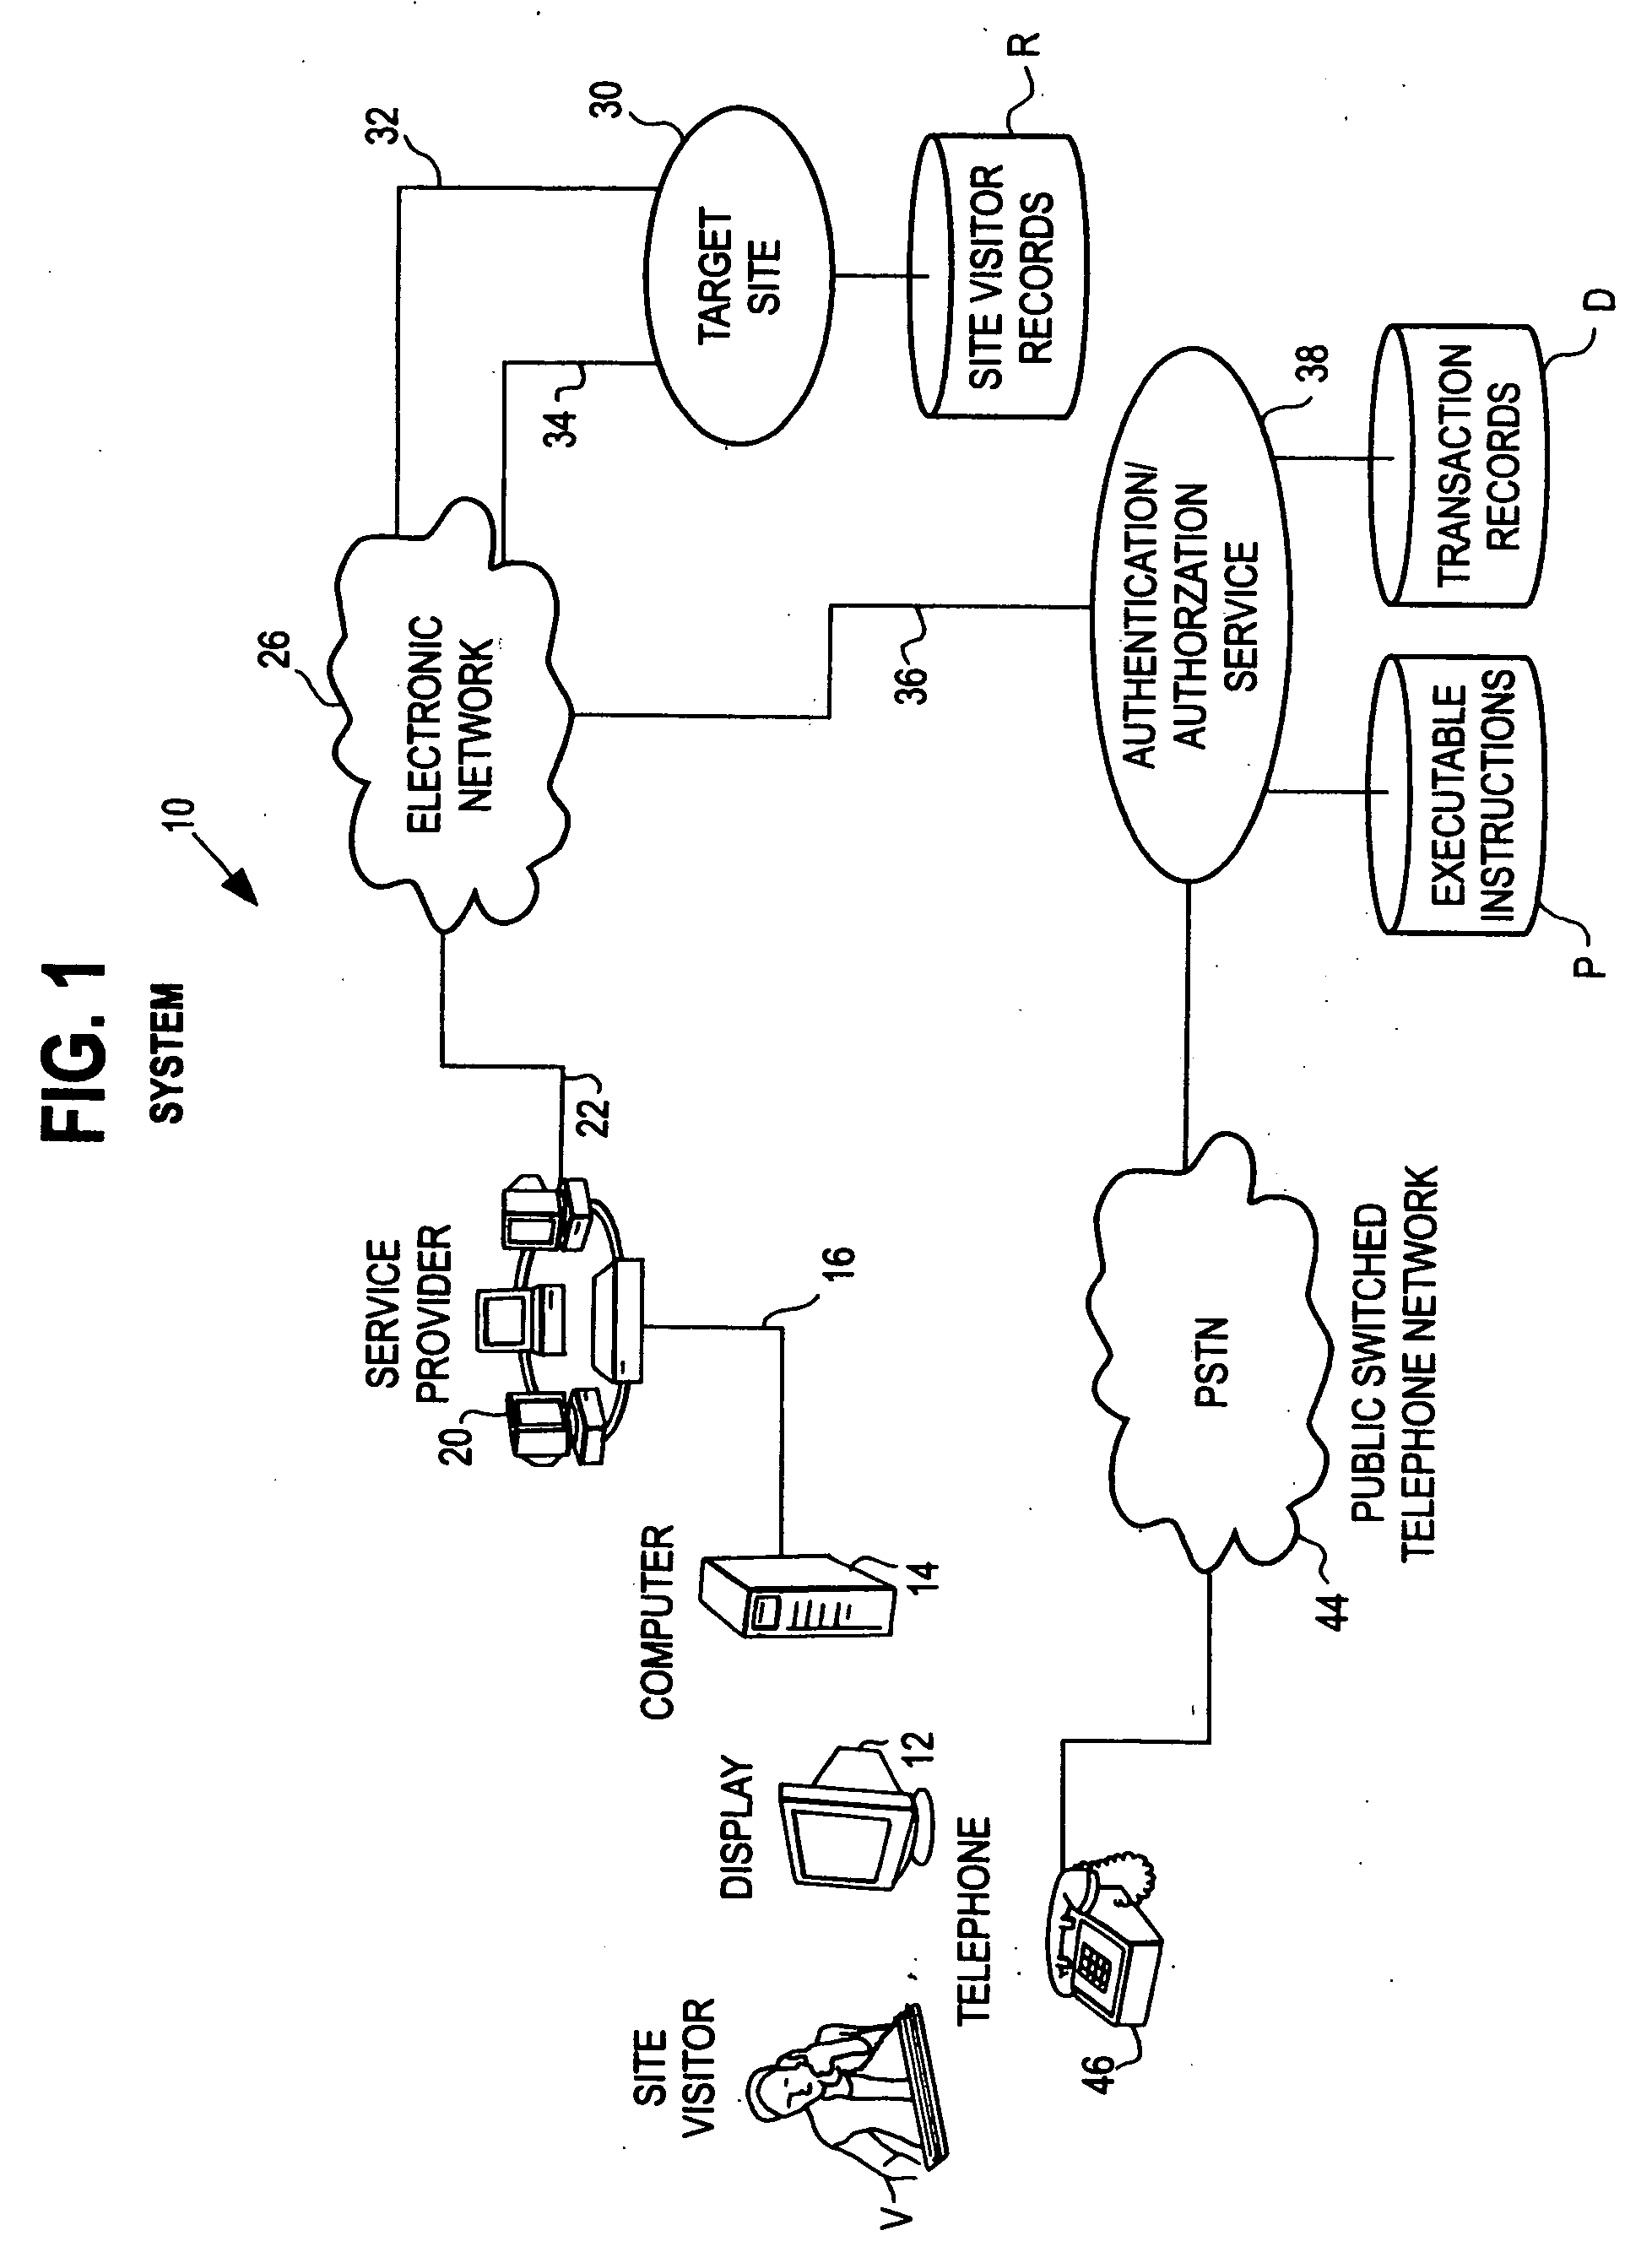 System and mehod of using the public switched telephone network in providing authentication or authorization for online transaction